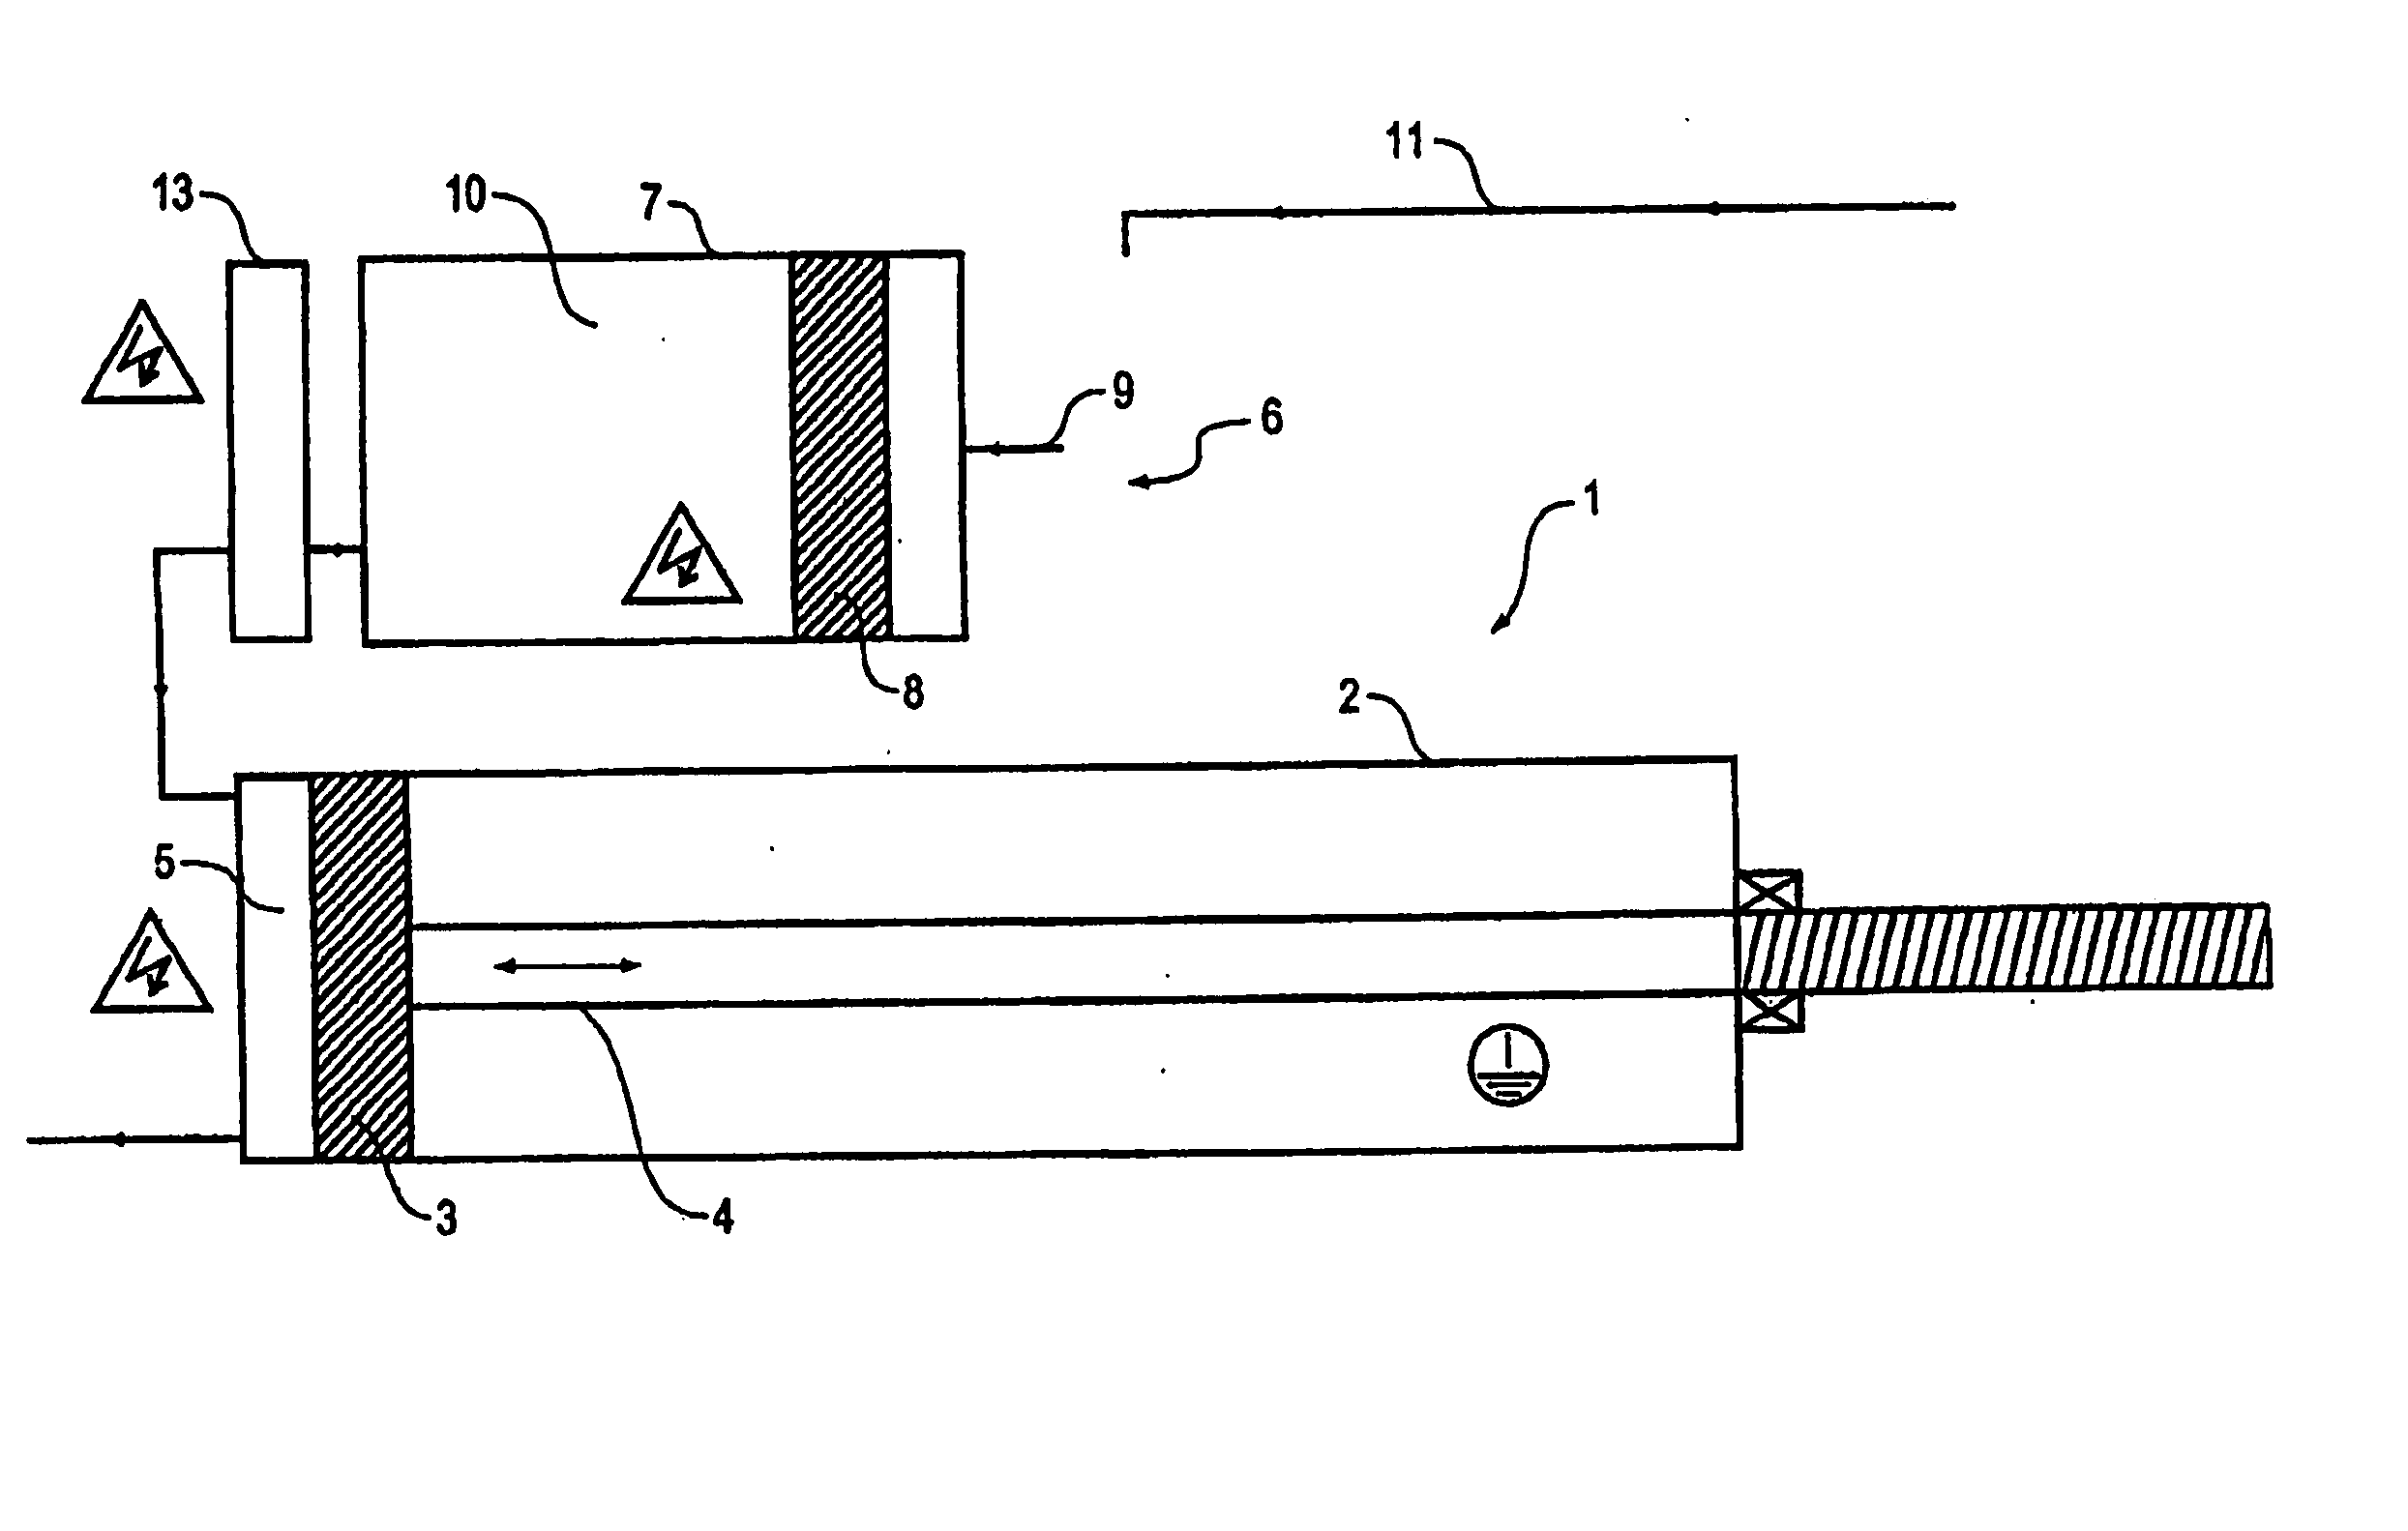 Coating material supply installation and associated operating procedure